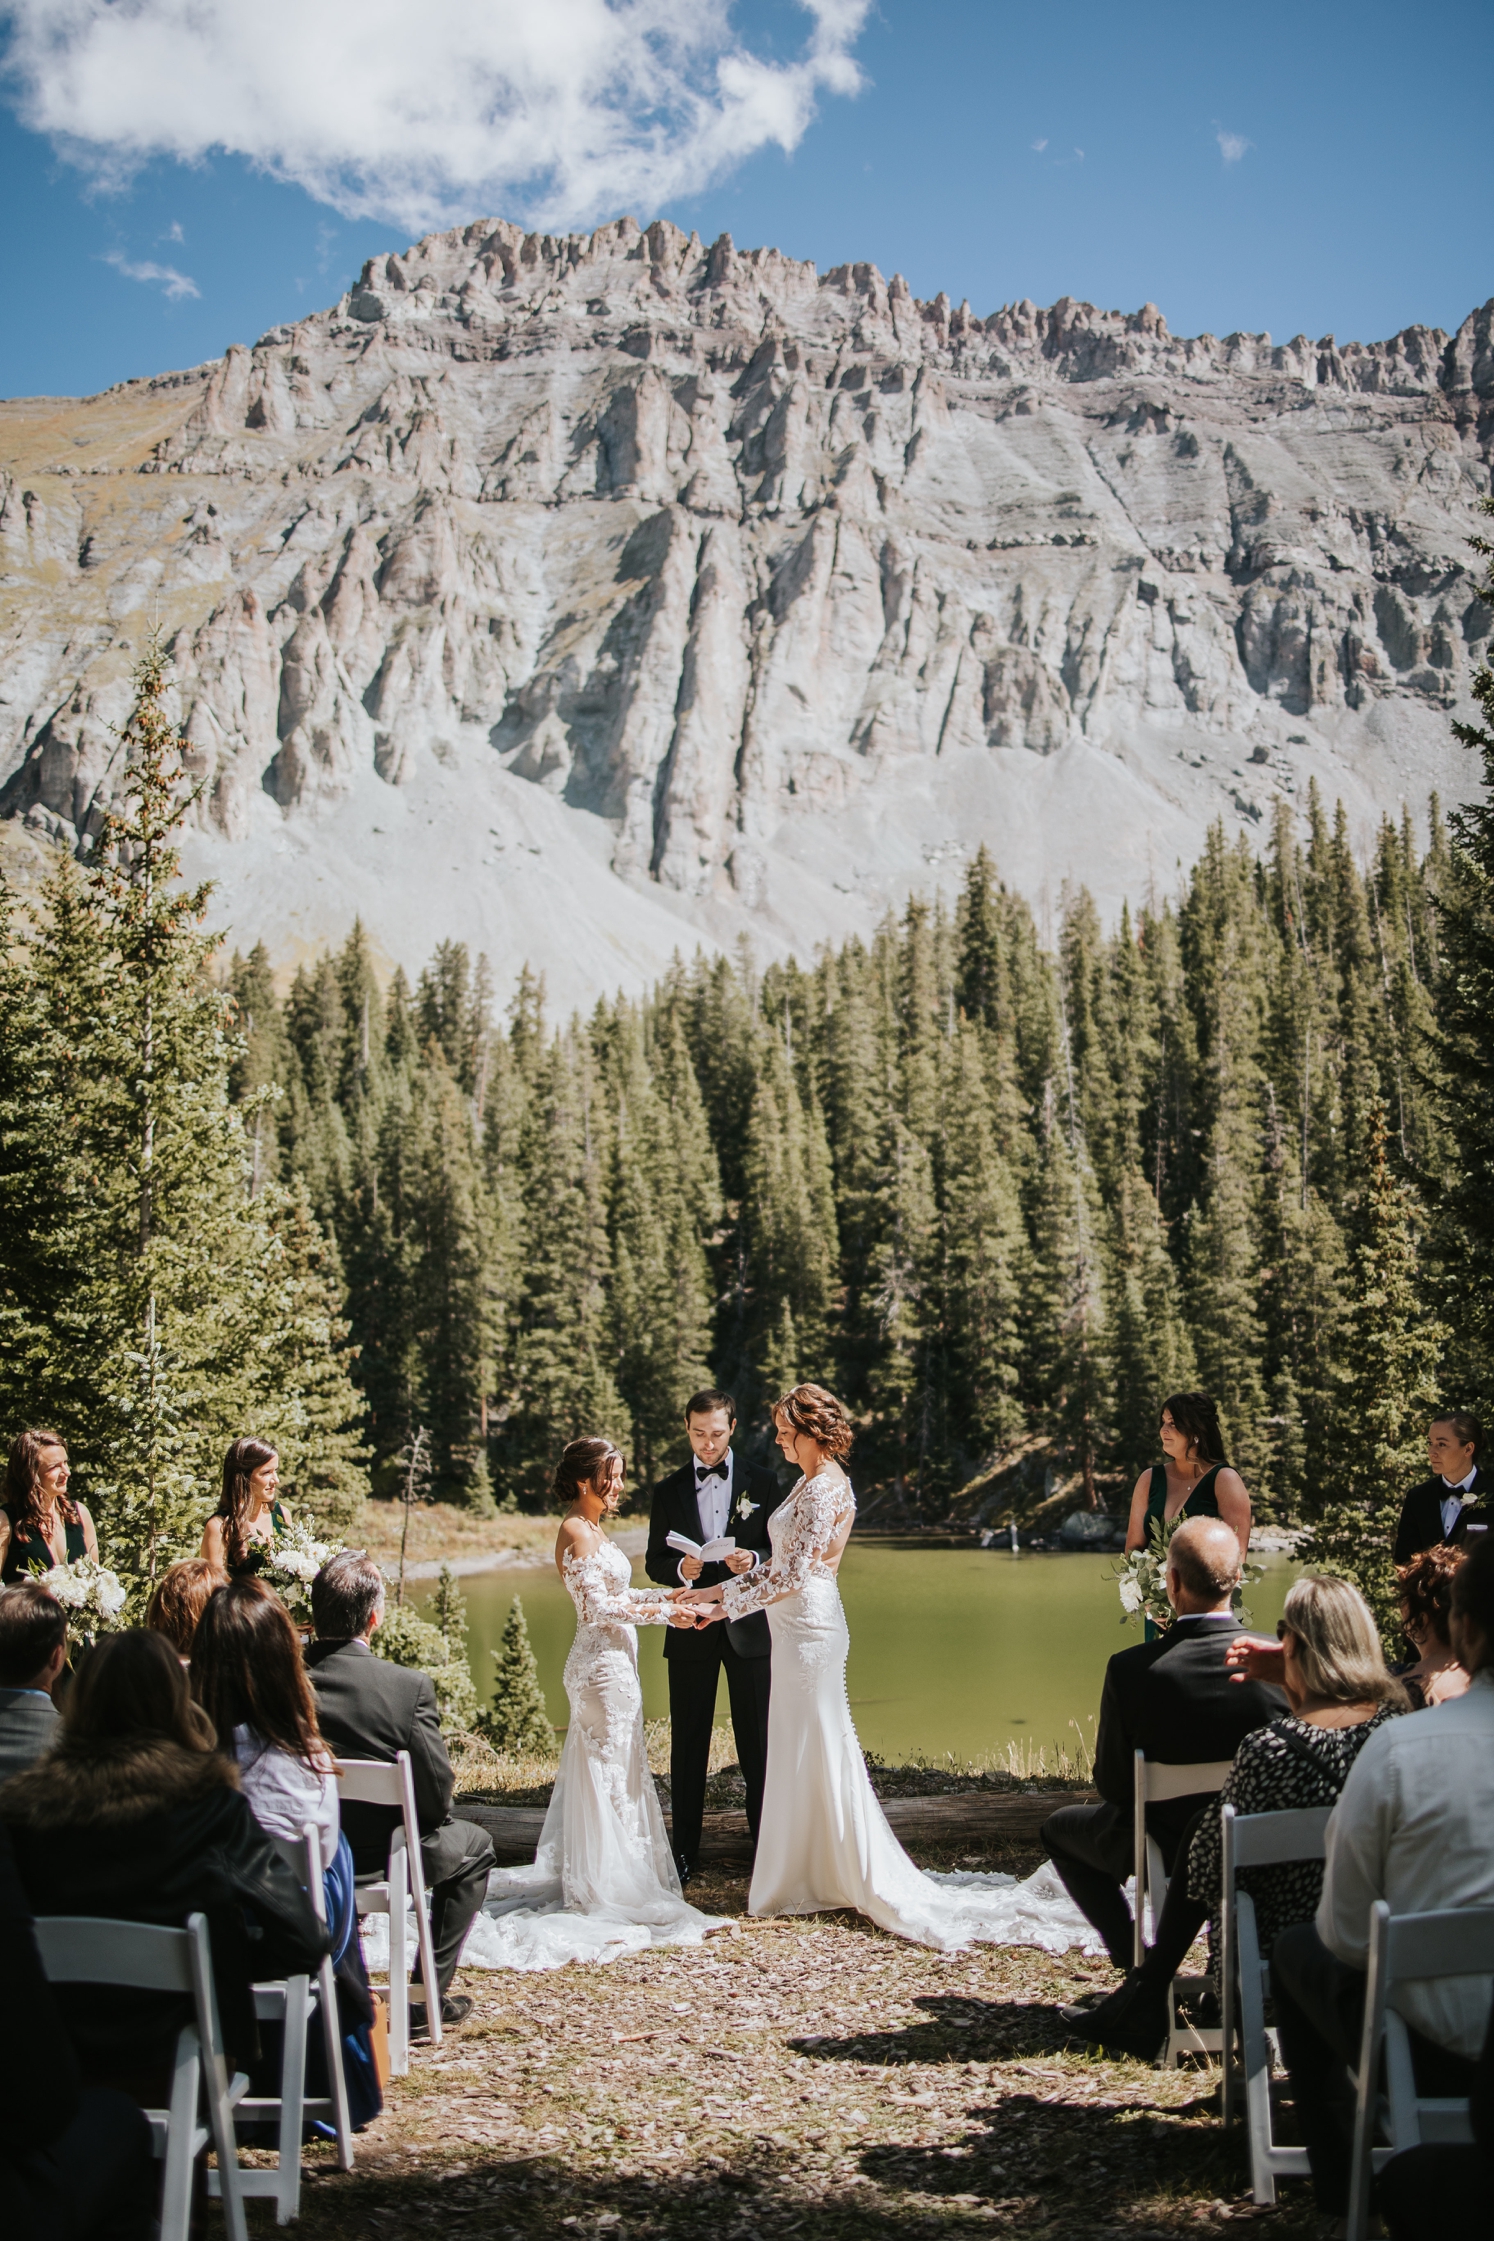 Couple holding hands at lakeside wedding ceremony in Telluride | McArthur Weddings and Events